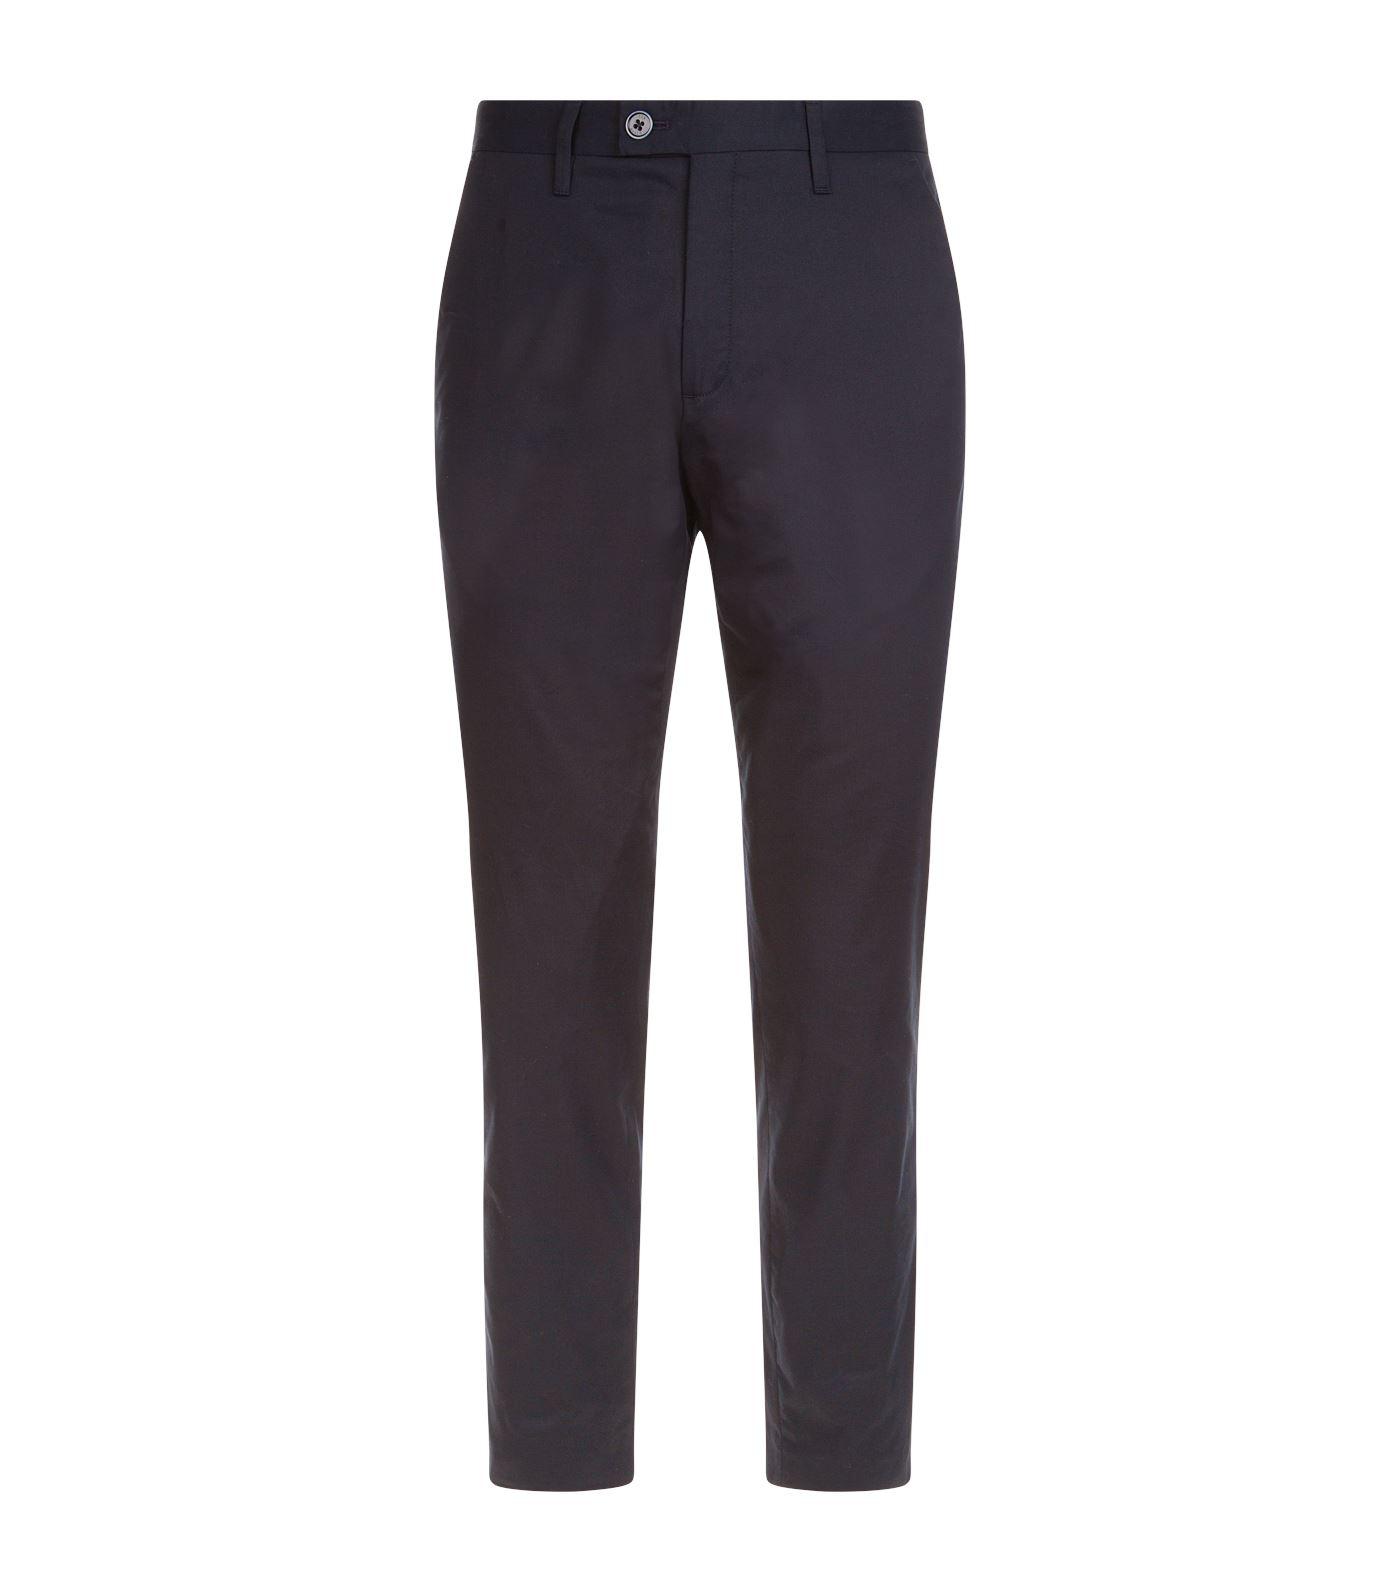 Ted Baker Cotton Cliftro Trousers in Navy (Blue) for Men - Lyst